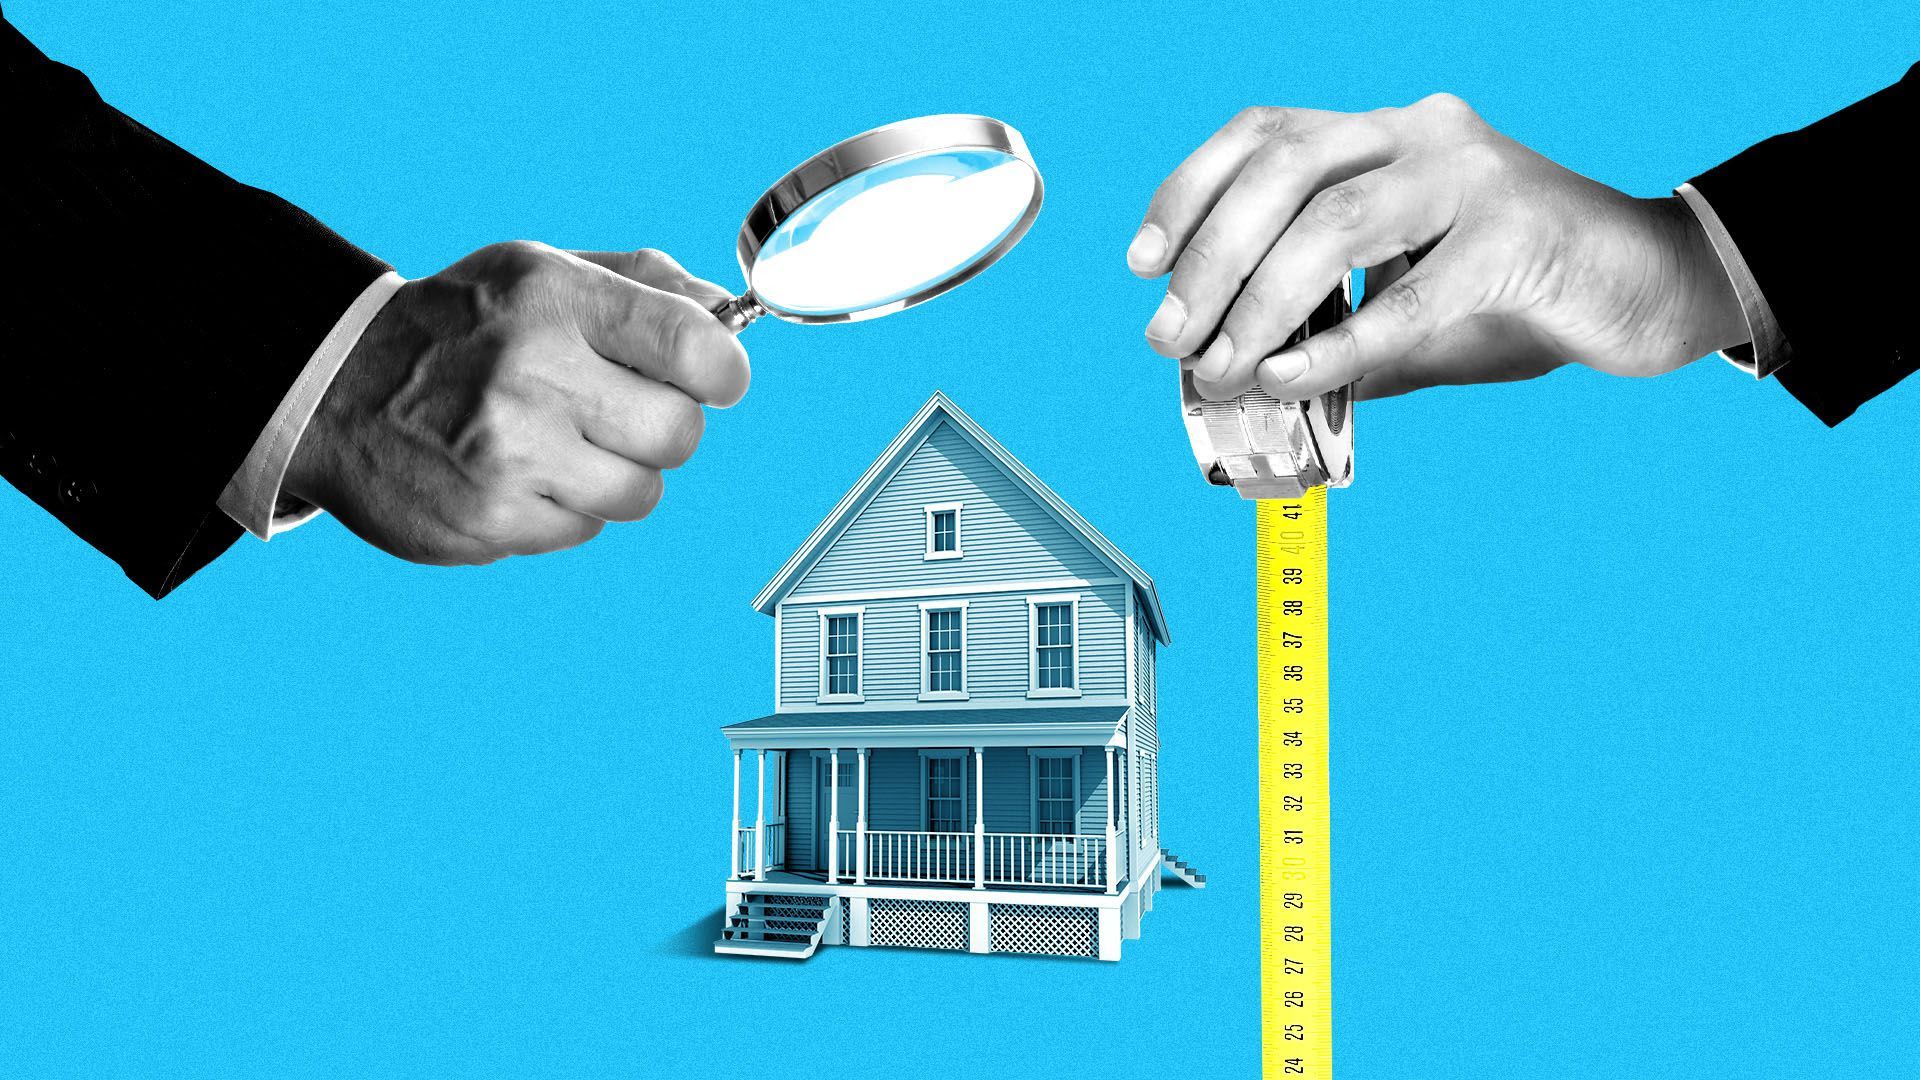 An illustration of a house being measured by a large hand.